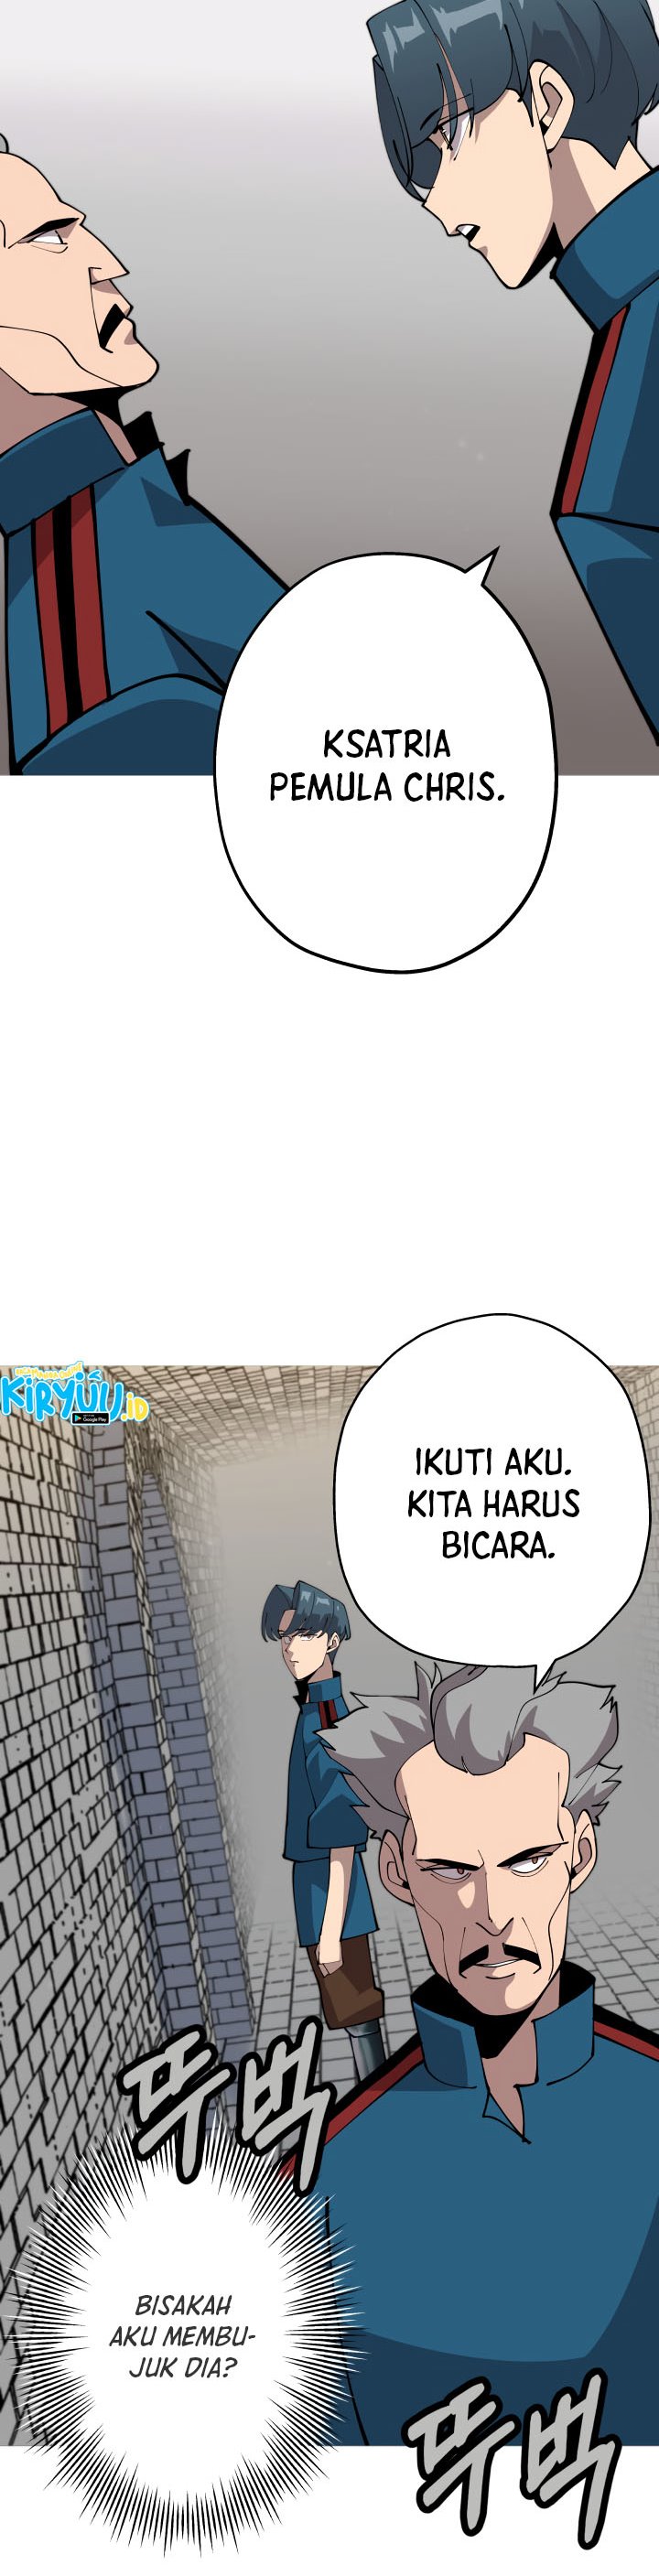 Dilarang COPAS - situs resmi www.mangacanblog.com - Komik the story of a low rank soldier becoming a monarch 022 - chapter 22 23 Indonesia the story of a low rank soldier becoming a monarch 022 - chapter 22 Terbaru 5|Baca Manga Komik Indonesia|Mangacan